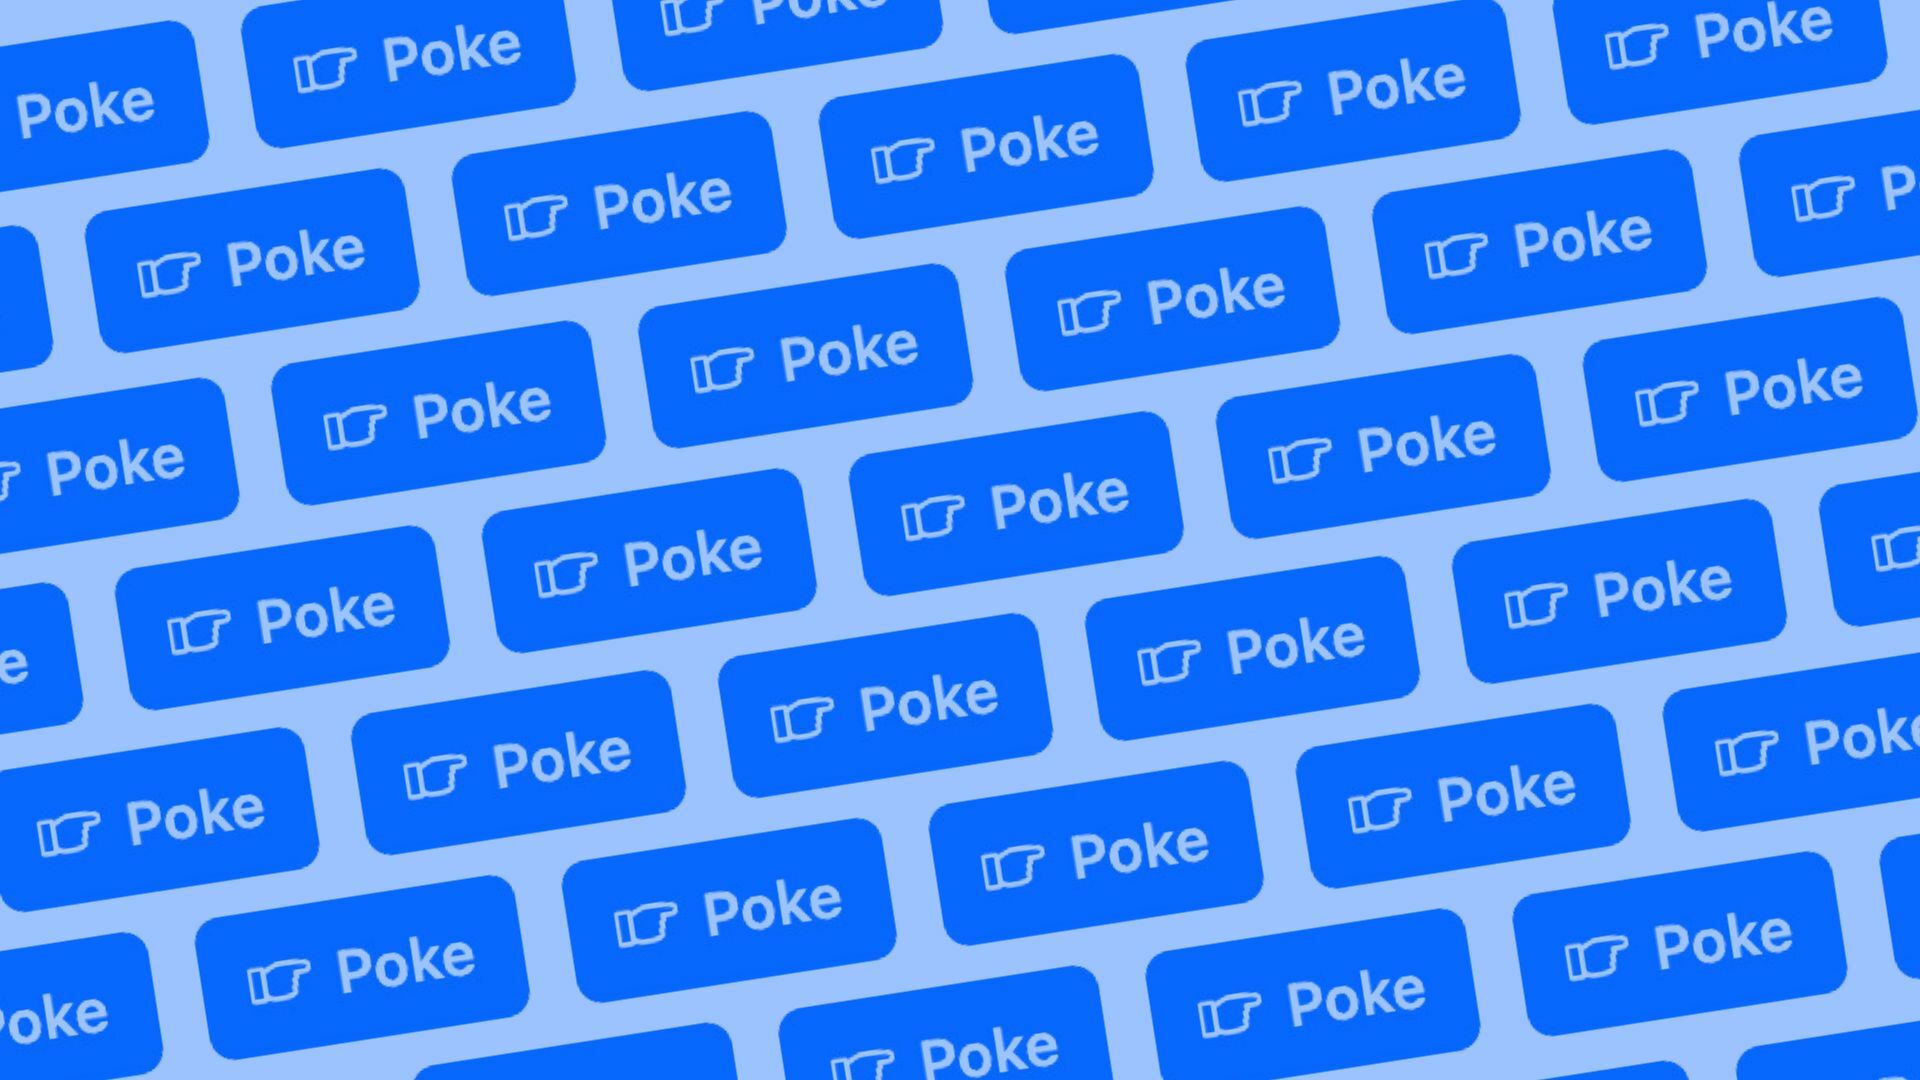 A wave of Poke icons from Facebook in a pattern.